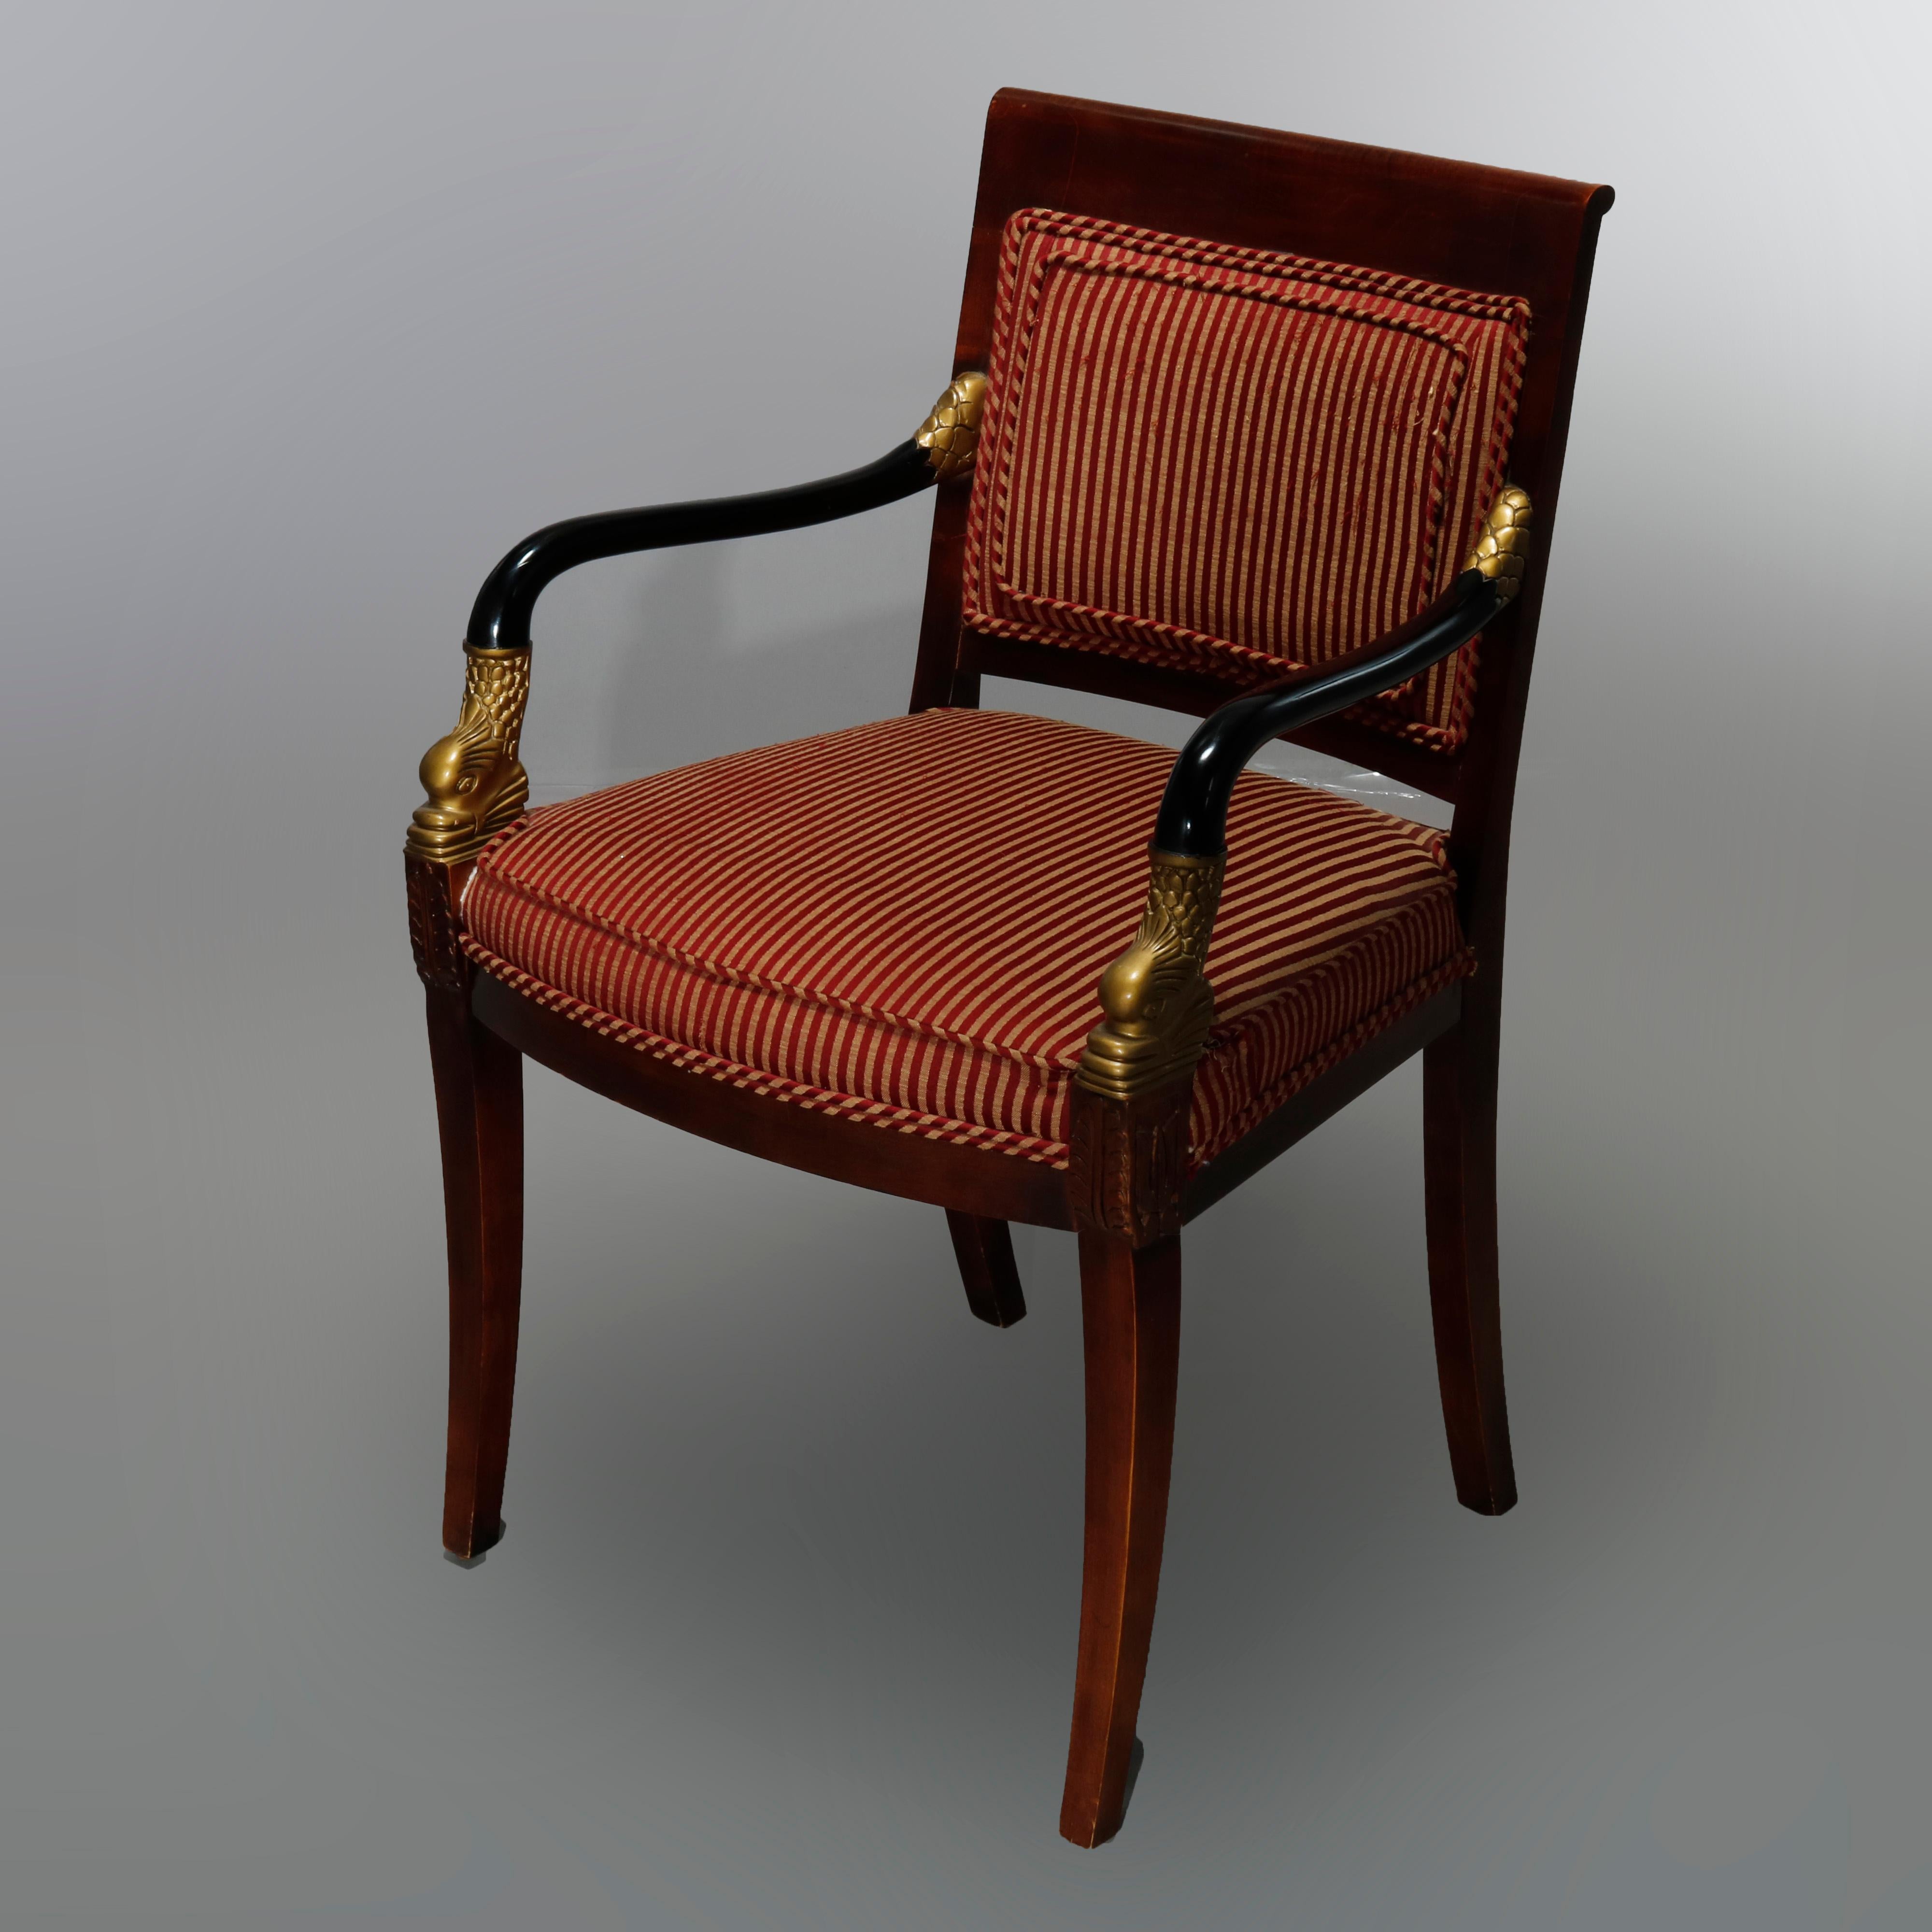 20th Century French Empire Century Chair Co. Carved, Ebonized & Gilt Mahogany Dolphin Chairs